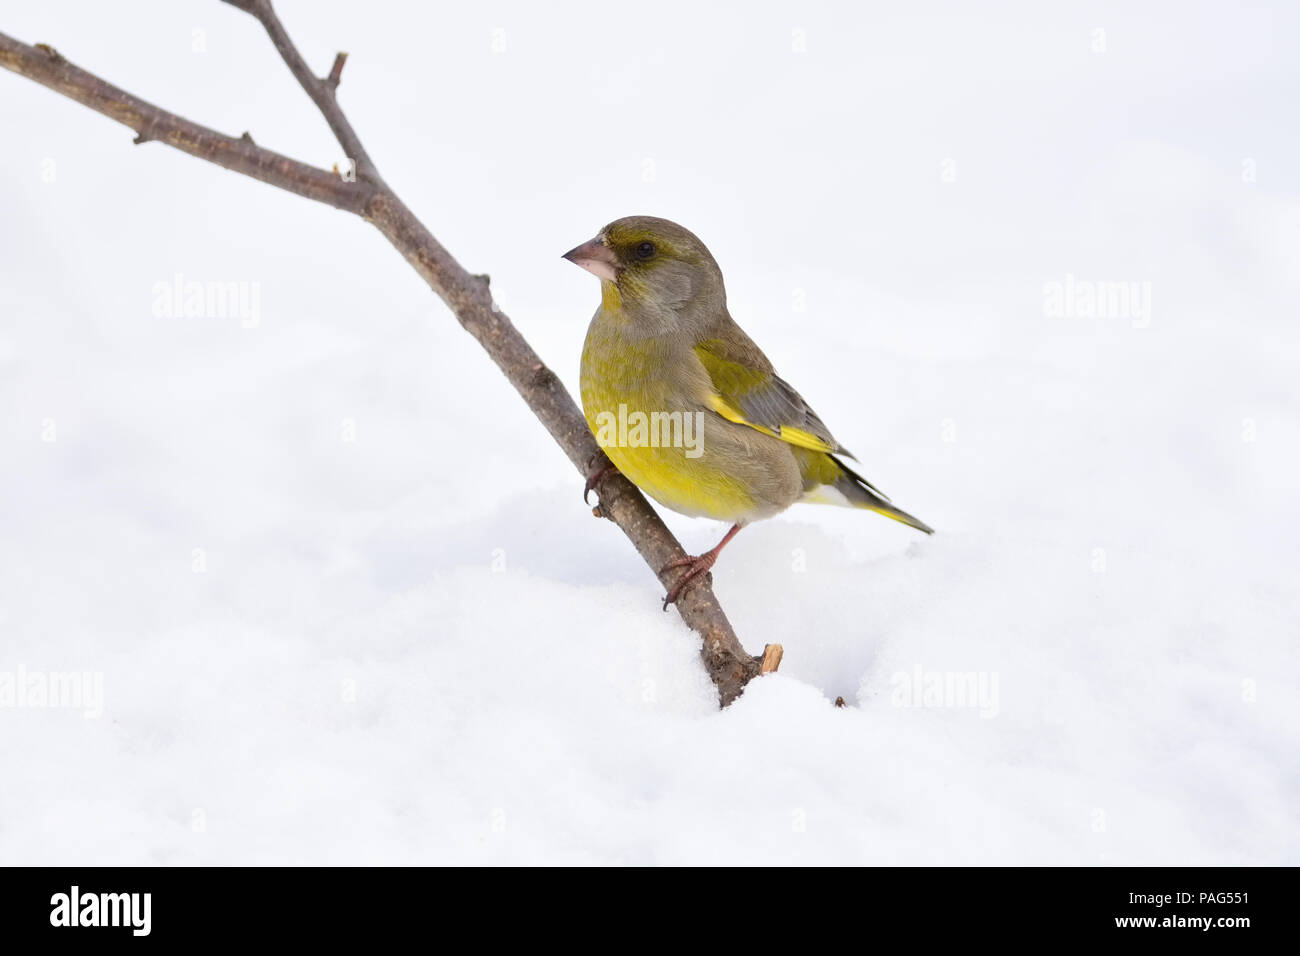 European greenfinch (Chloris chloris) sits on a branch sticking out of snow (isolated against white snow). Stock Photo